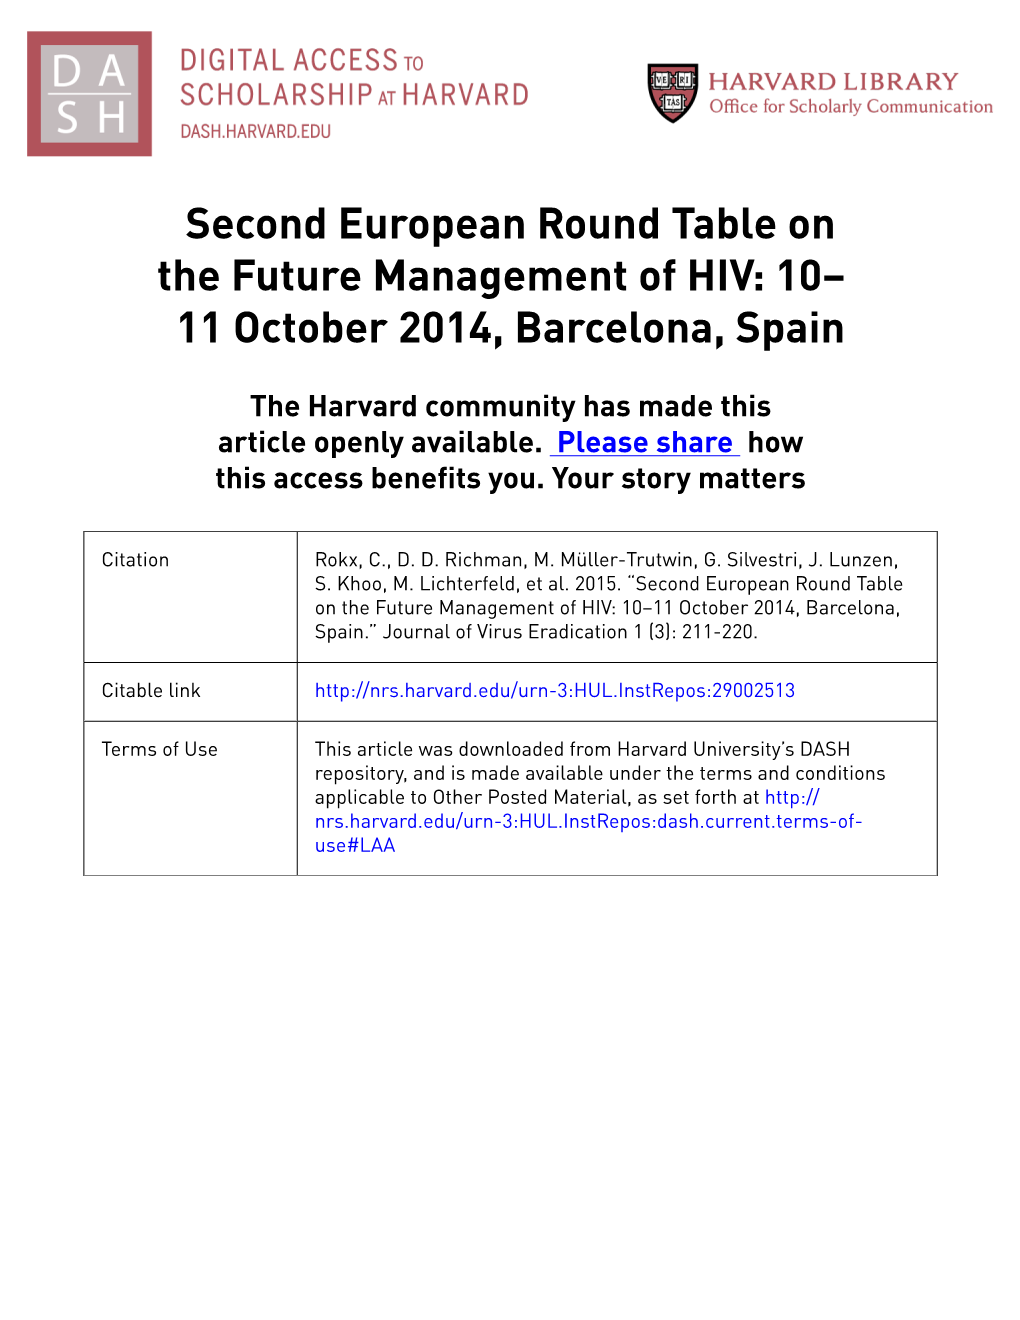 Second European Round Table on the Future Management of HIV: 10– 11 October 2014, Barcelona, Spain